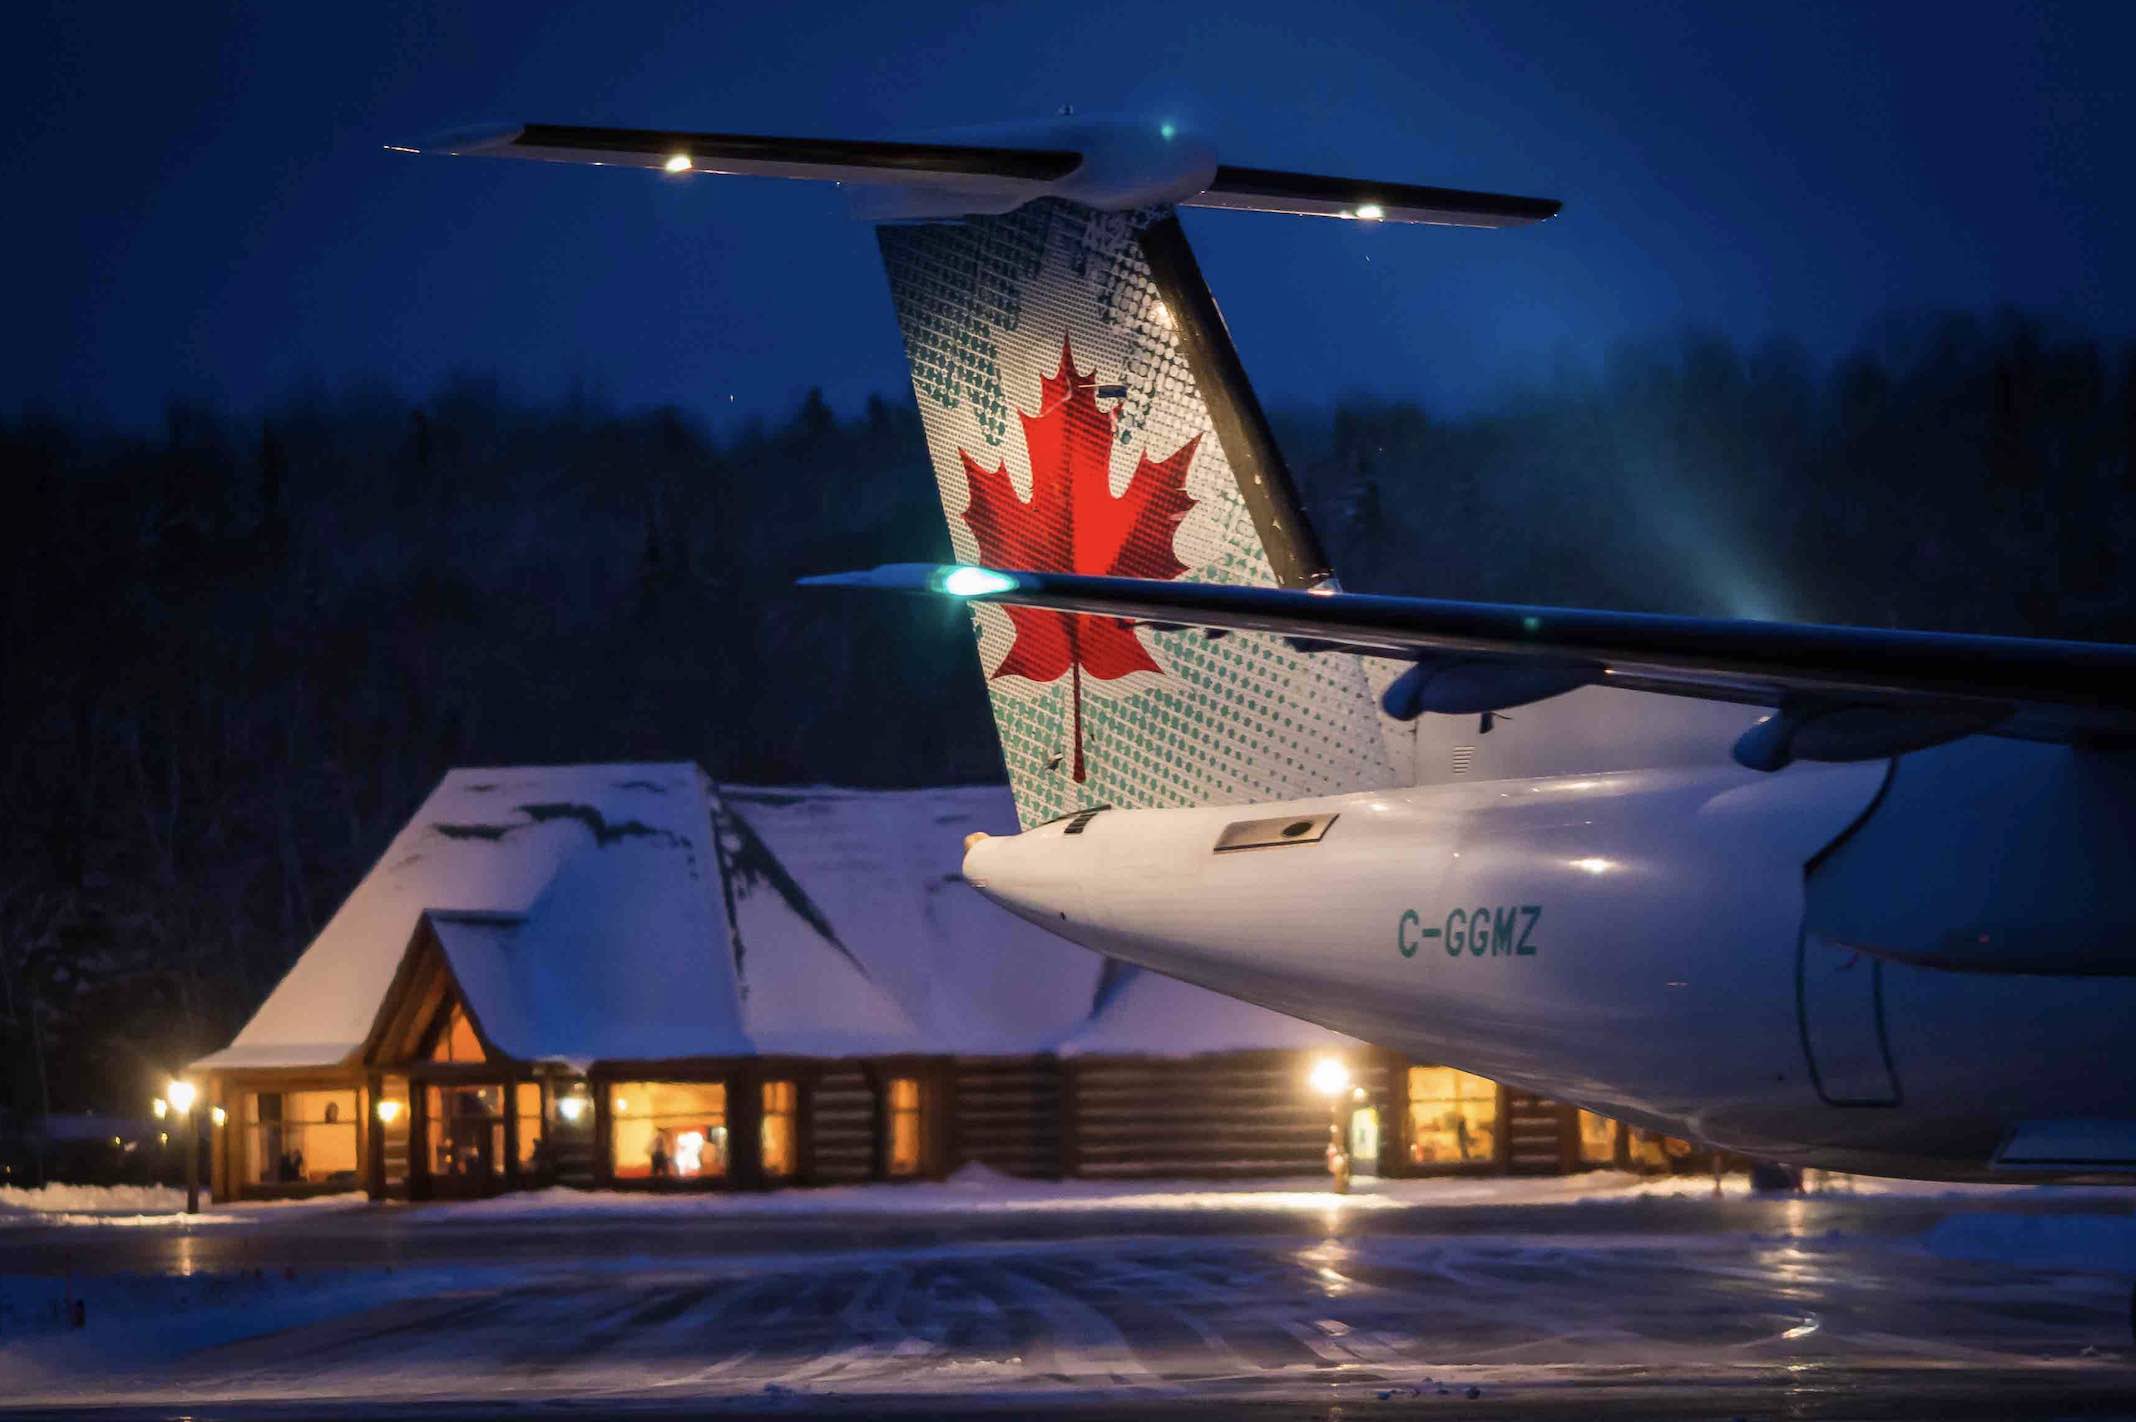 Air Canada jet sitting at airport in Mont-Tremblant at night